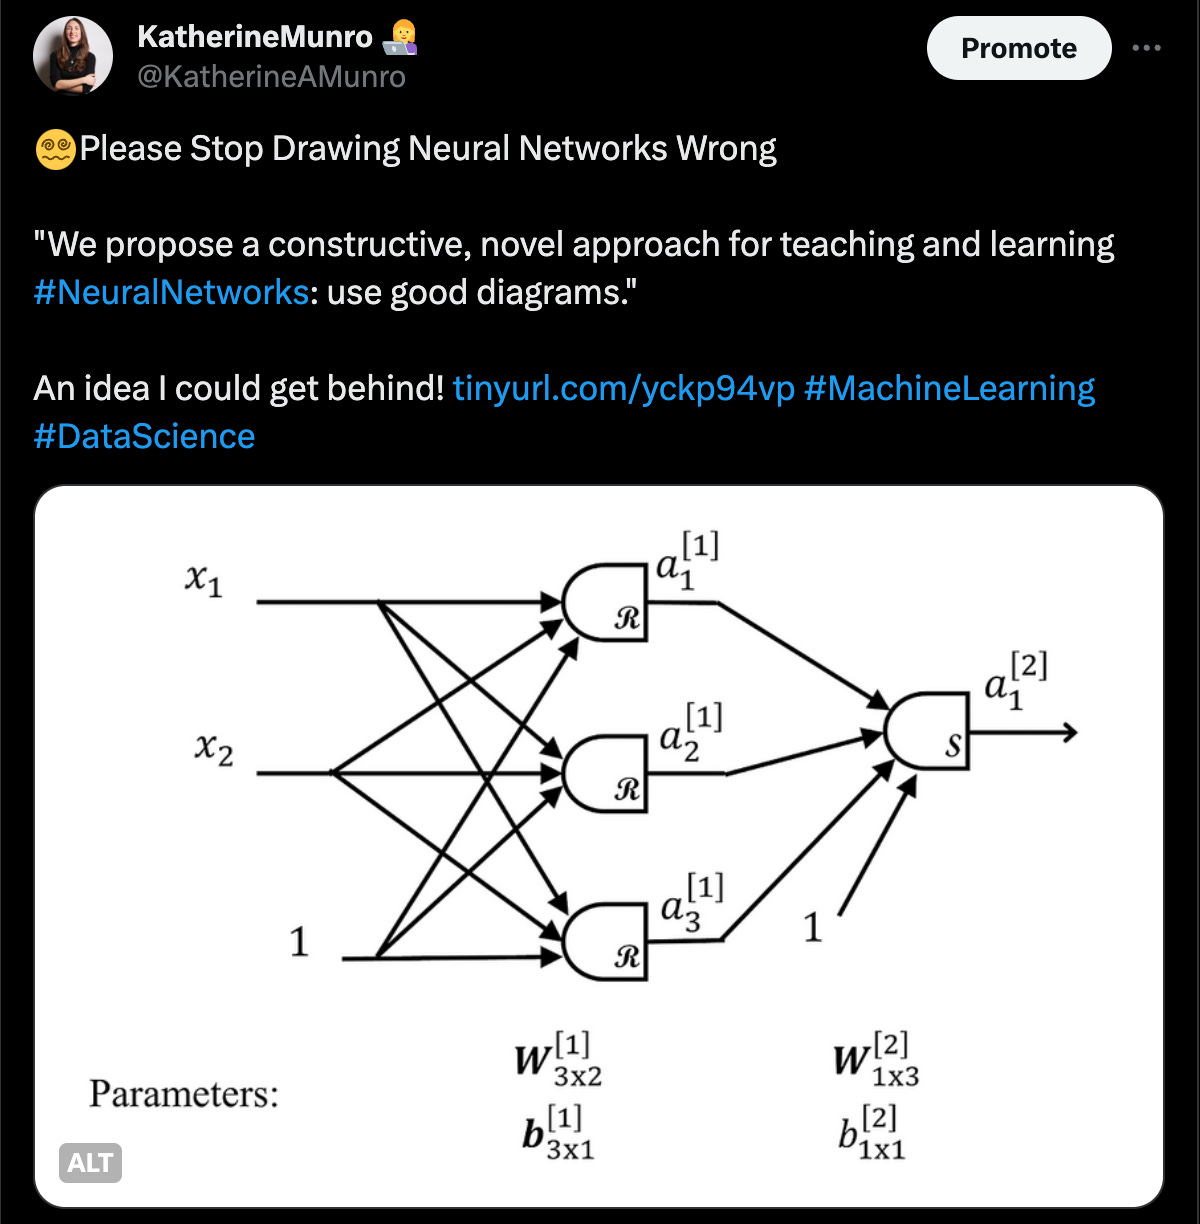 A tweet from the author, which reads: 😵‍💫Please Stop Drawing Neural Networks Wrong  "We propose a constructive, novel approach for teaching and learning #NeuralNetworks: use good diagrams."  An idea I could get behind! https://tinyurl.com/yckp94vp #MachineLearning #DataScience